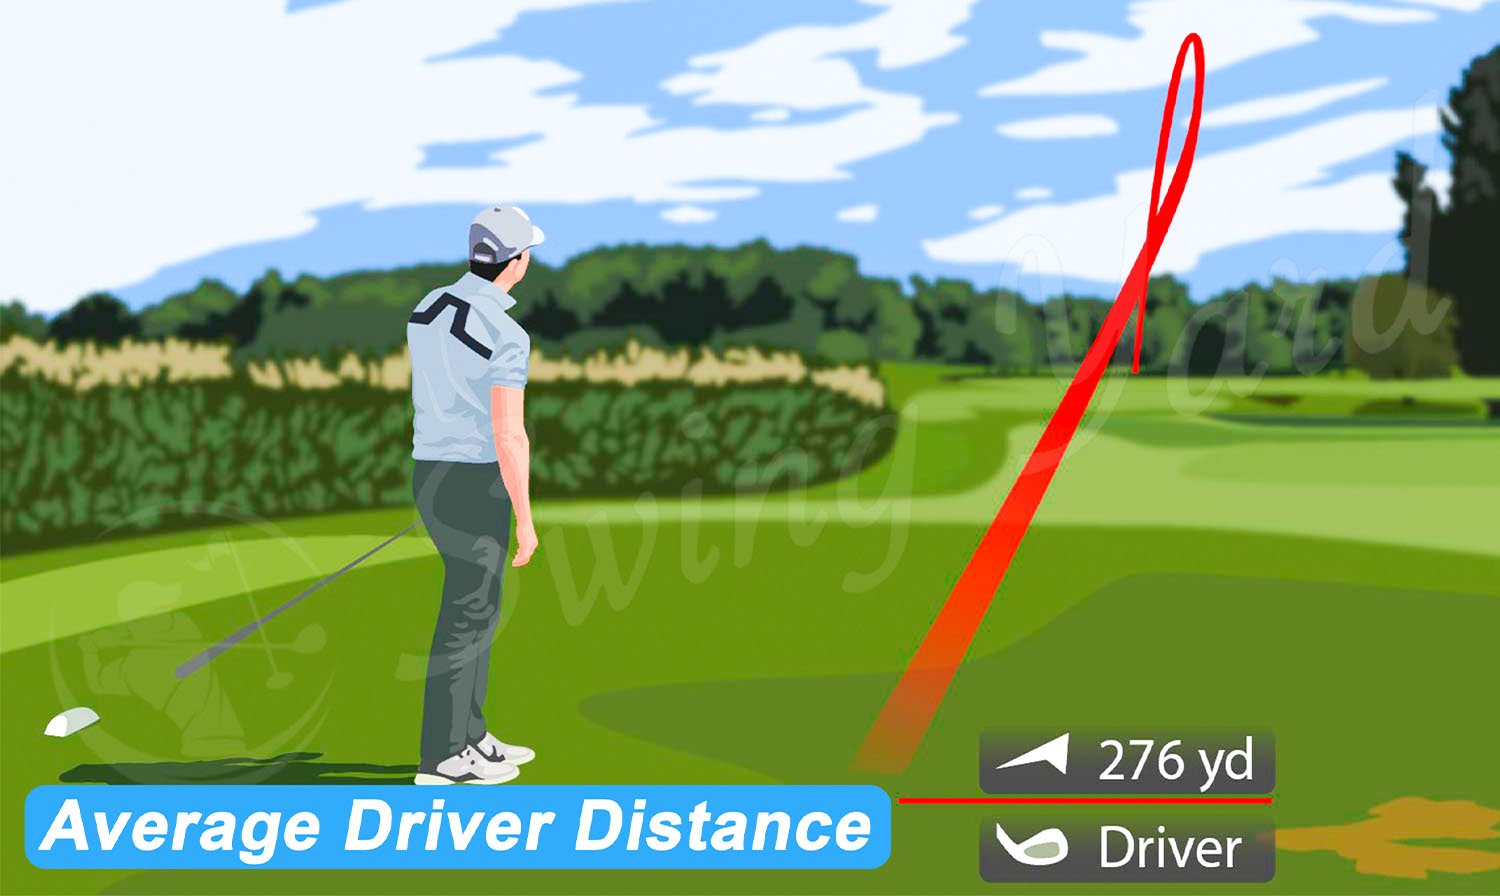 A guy hitting a driver the average distance